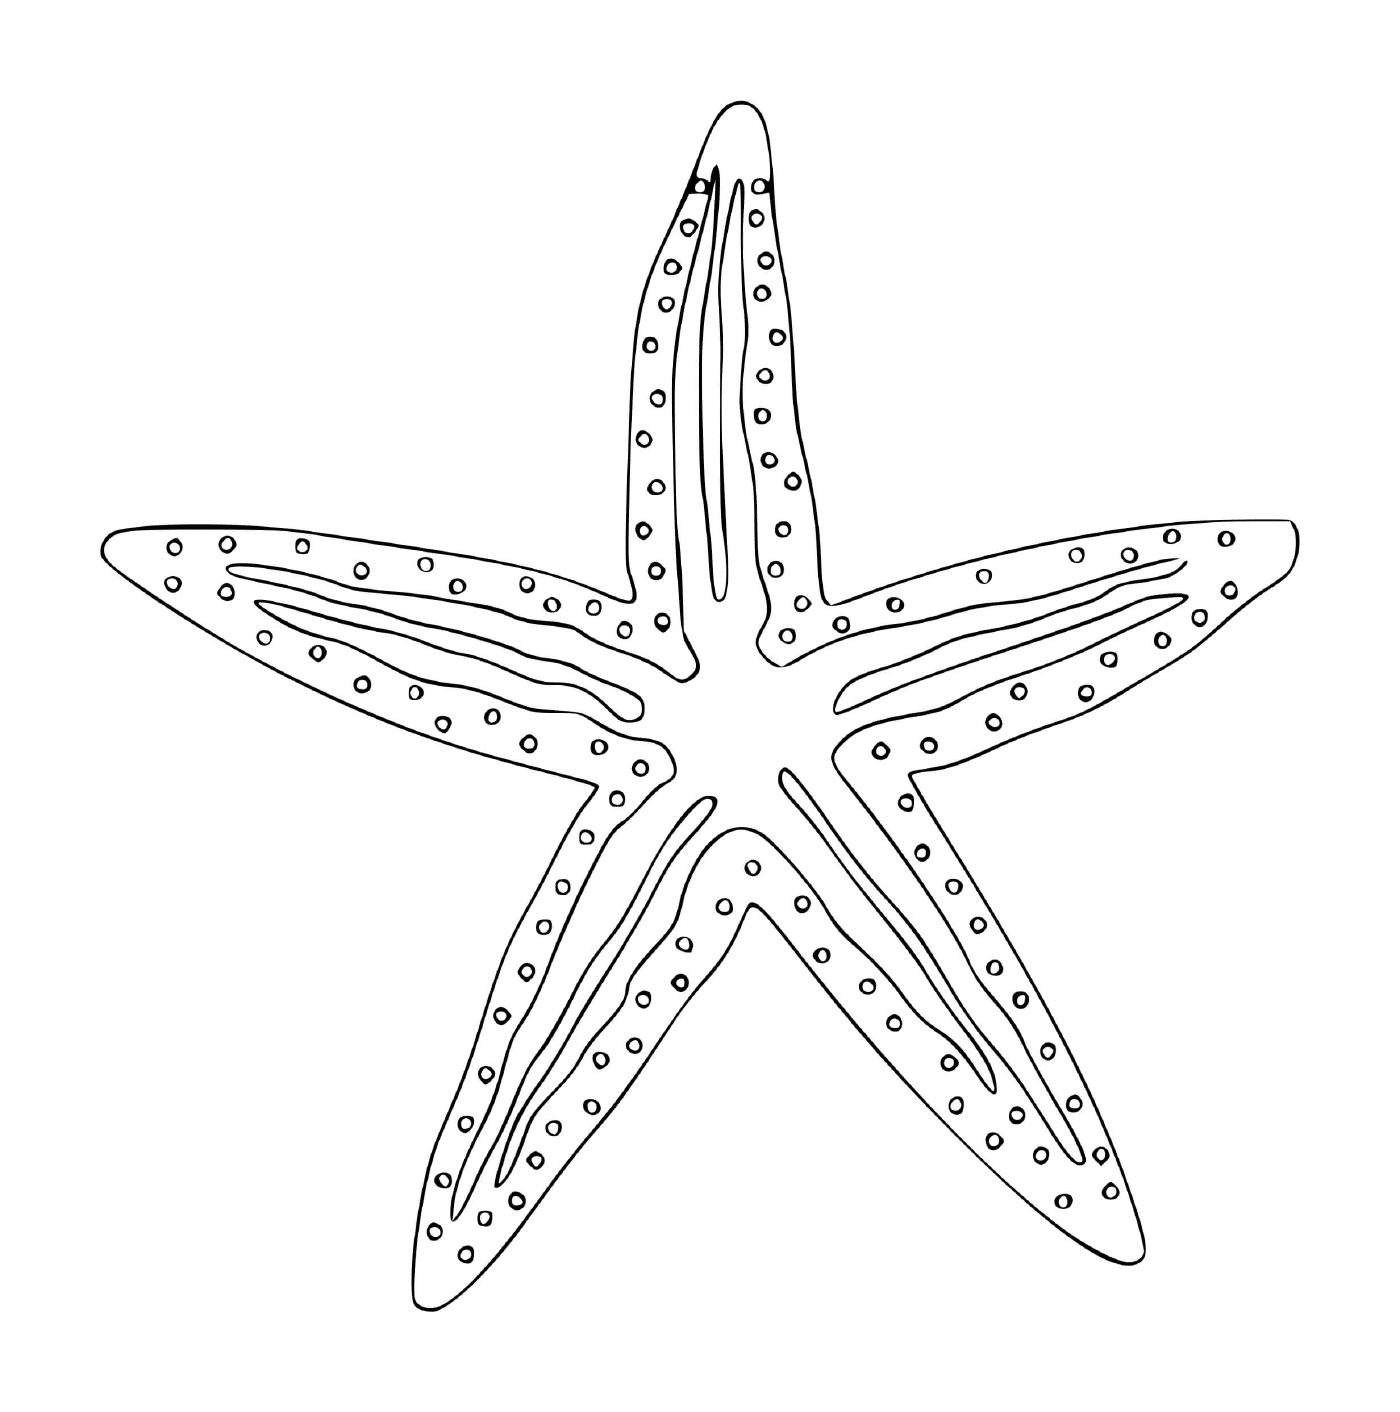  A starfish in the shape of a marine animal 